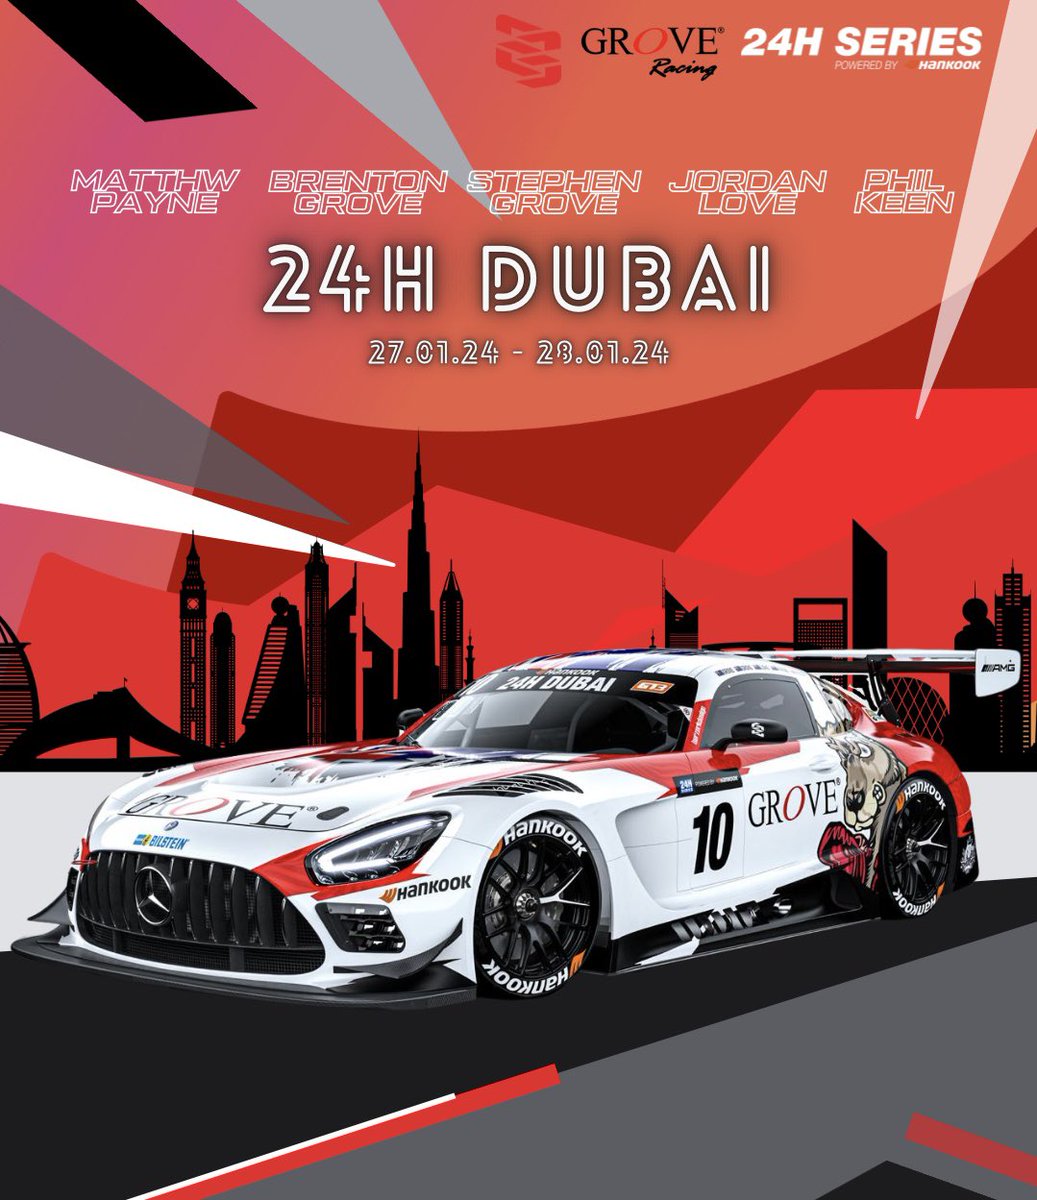 From one race weekend to the next! We’re coming for you Dubai #EBM #24HourSeries #ThisIsEndurance